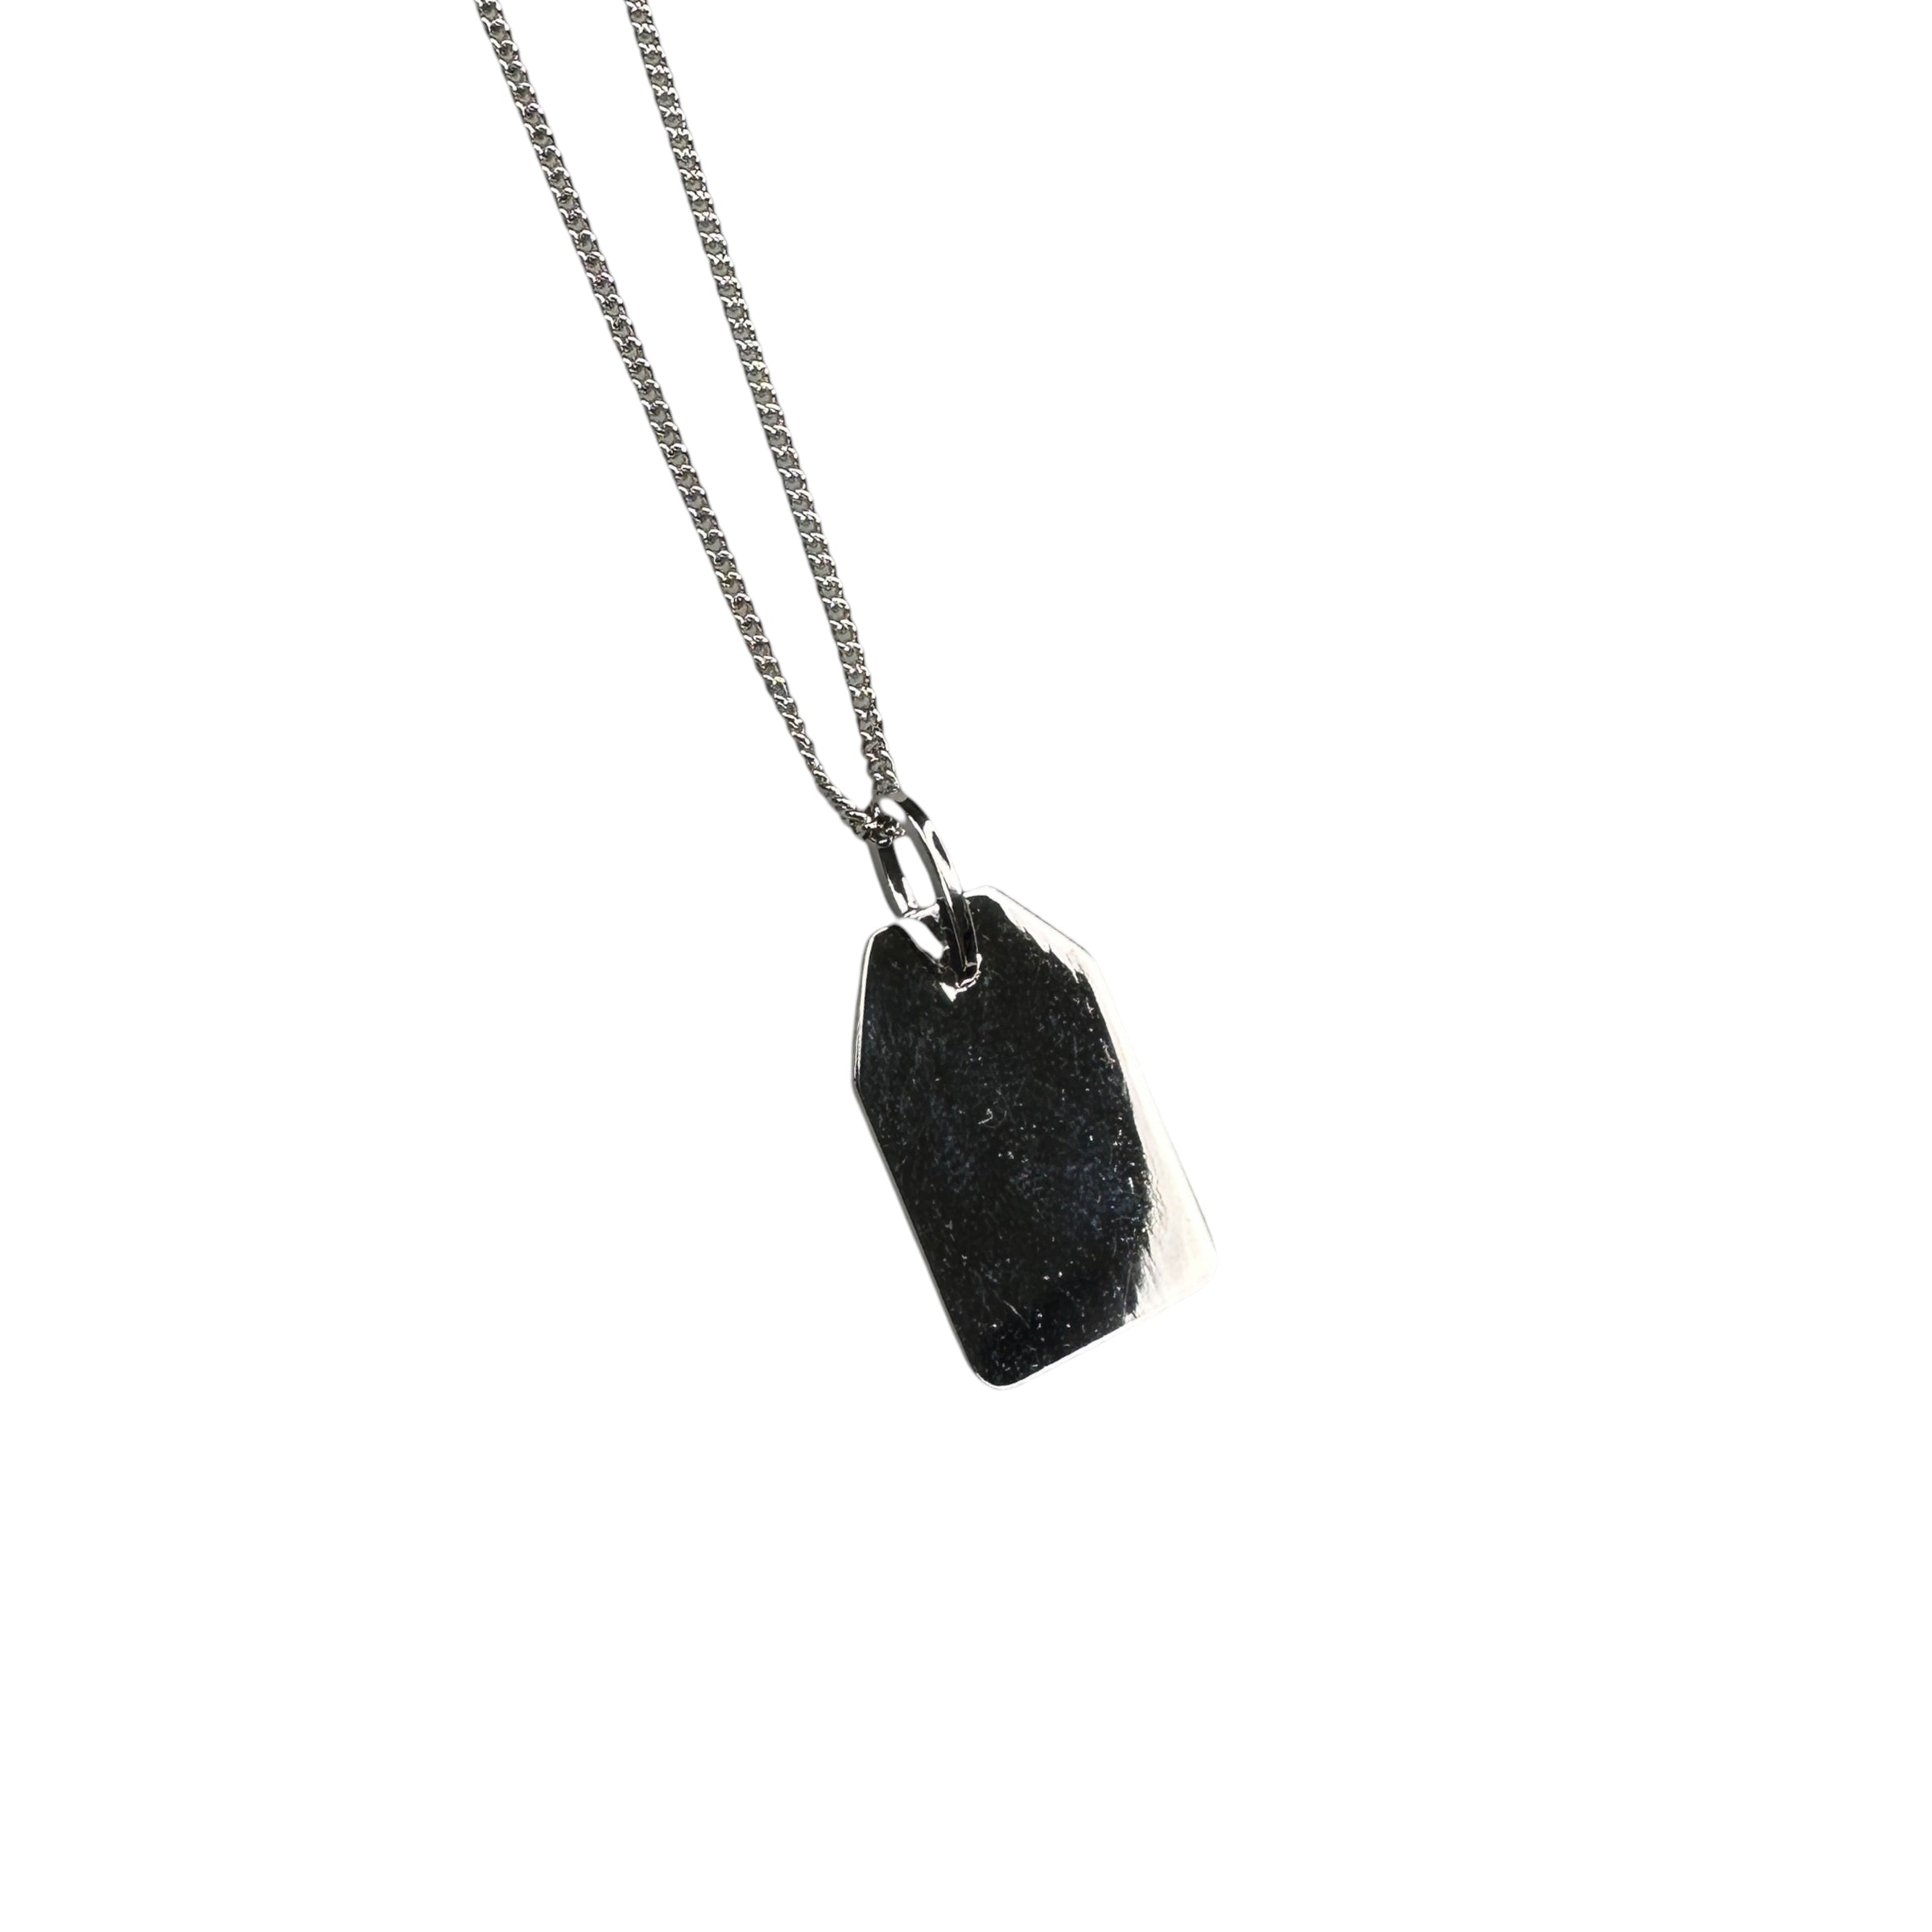 DIOR COUTURE PENDANT NECKLACE - SILVER PLATED